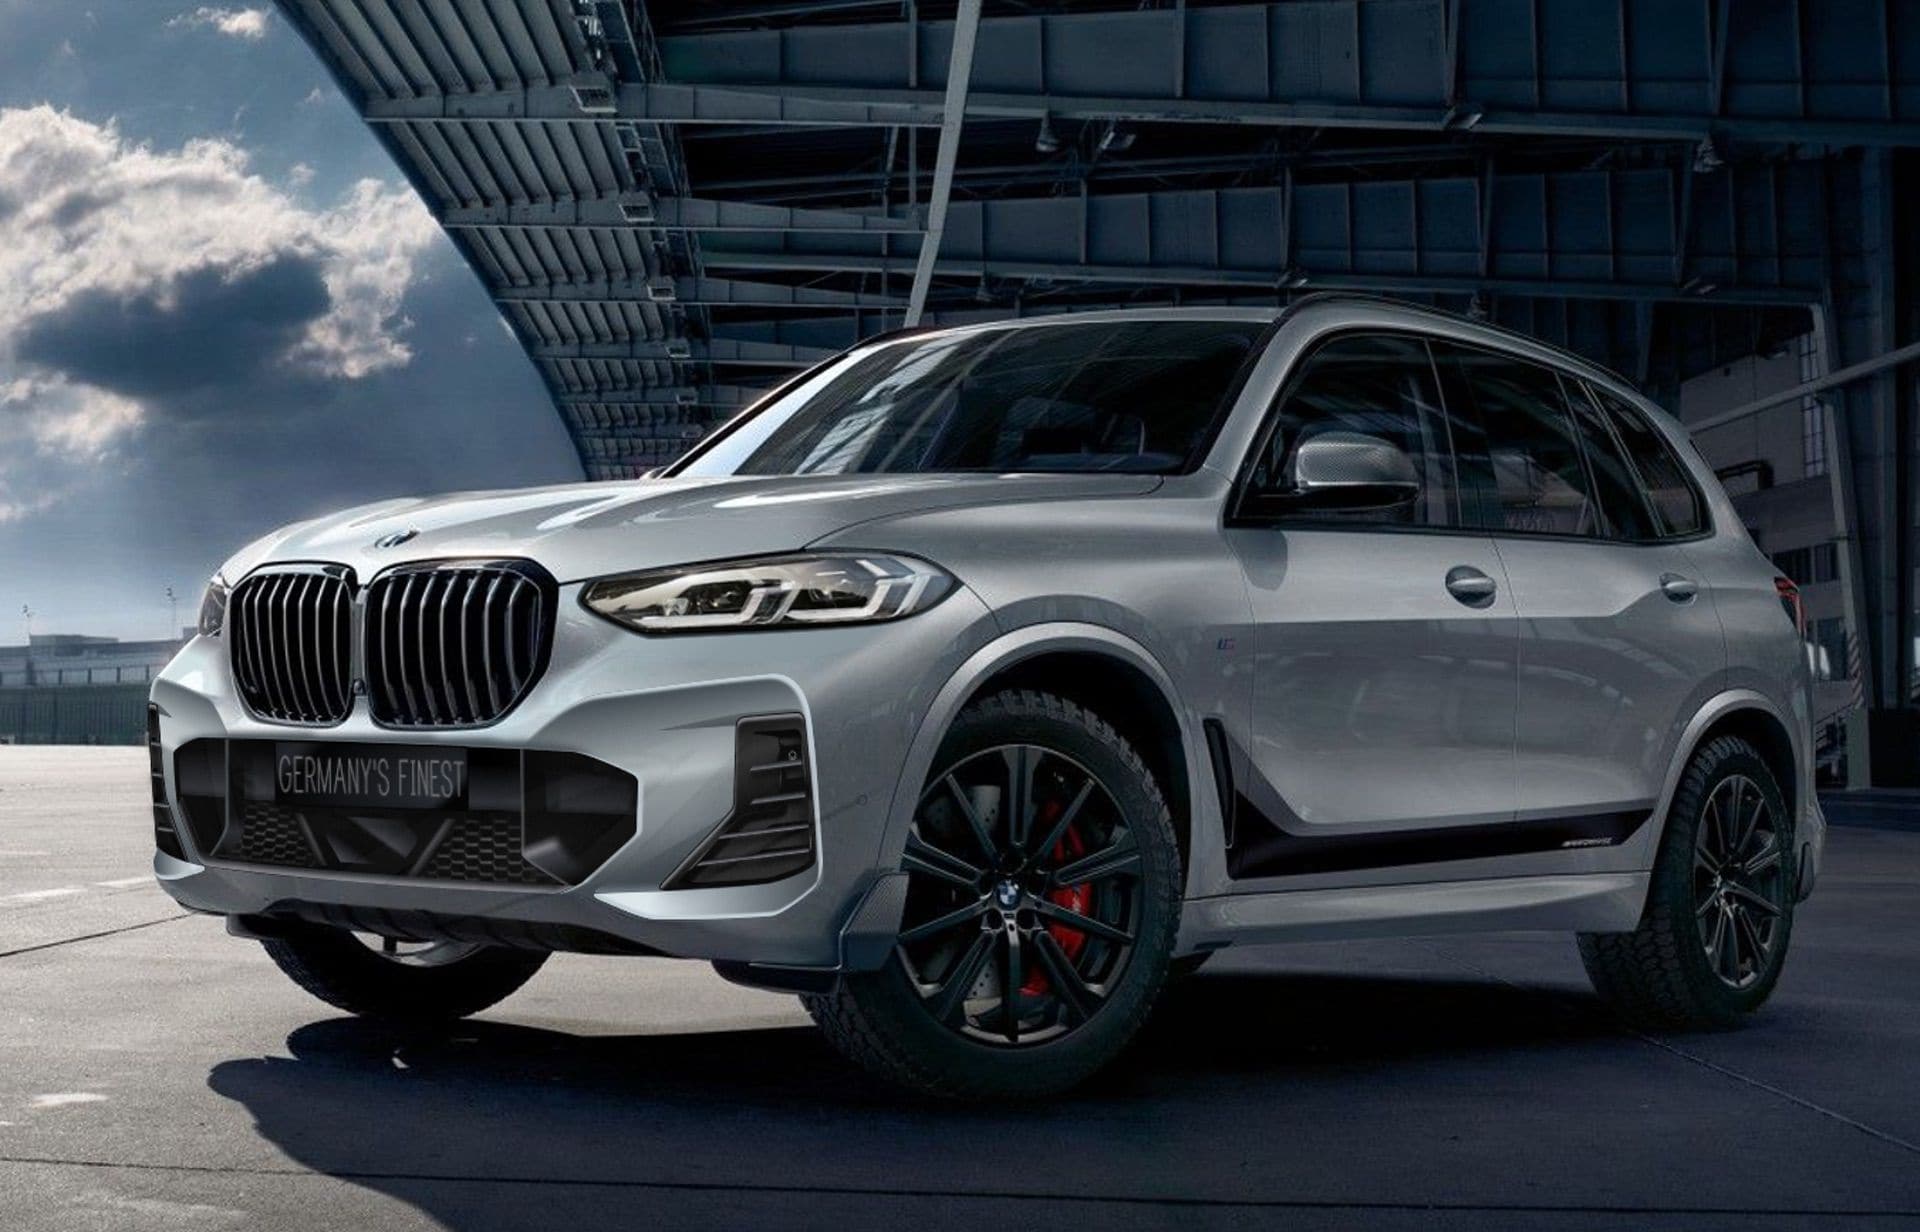 2023 BMW X5 LCI Facelift Rendering Shows a Sleek Front-End